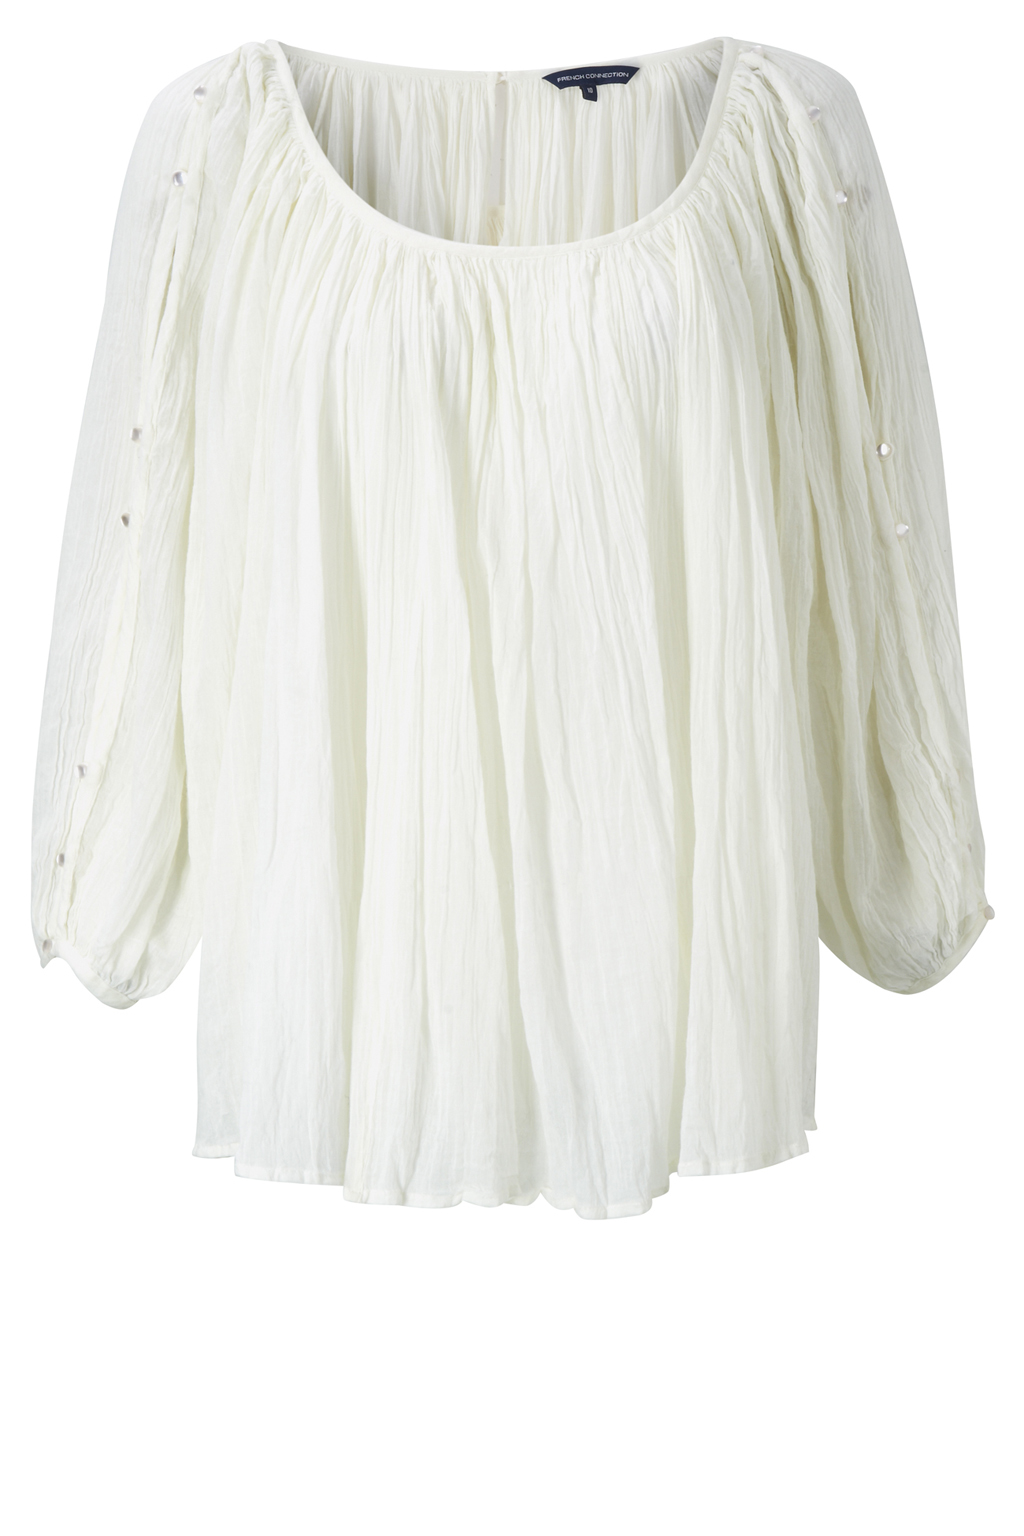 French connection Summer Gauze Top in Natural | Lyst